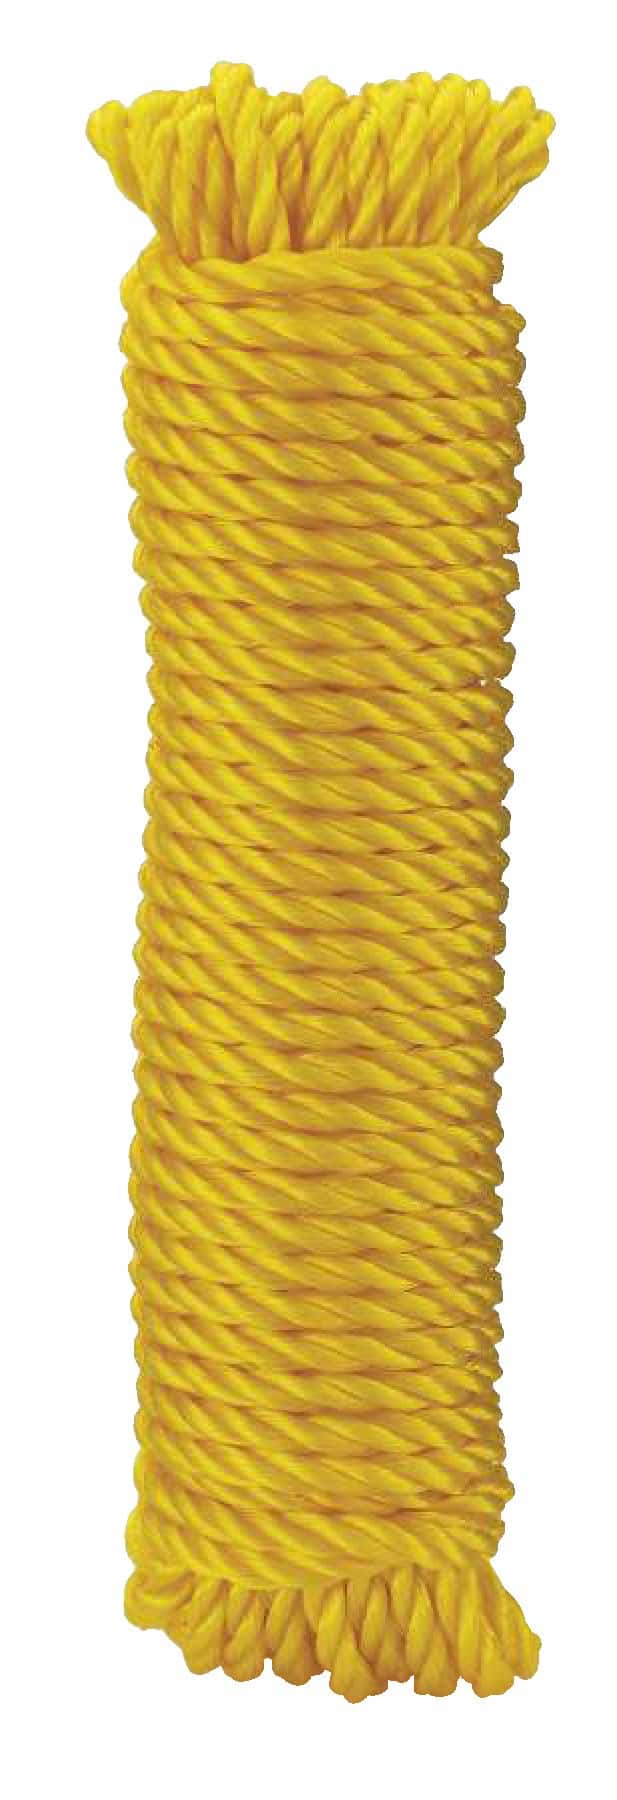 KingCord Polypropylene Waterproof Twisted Rope, Yellow, 1/4-in x 50-ft